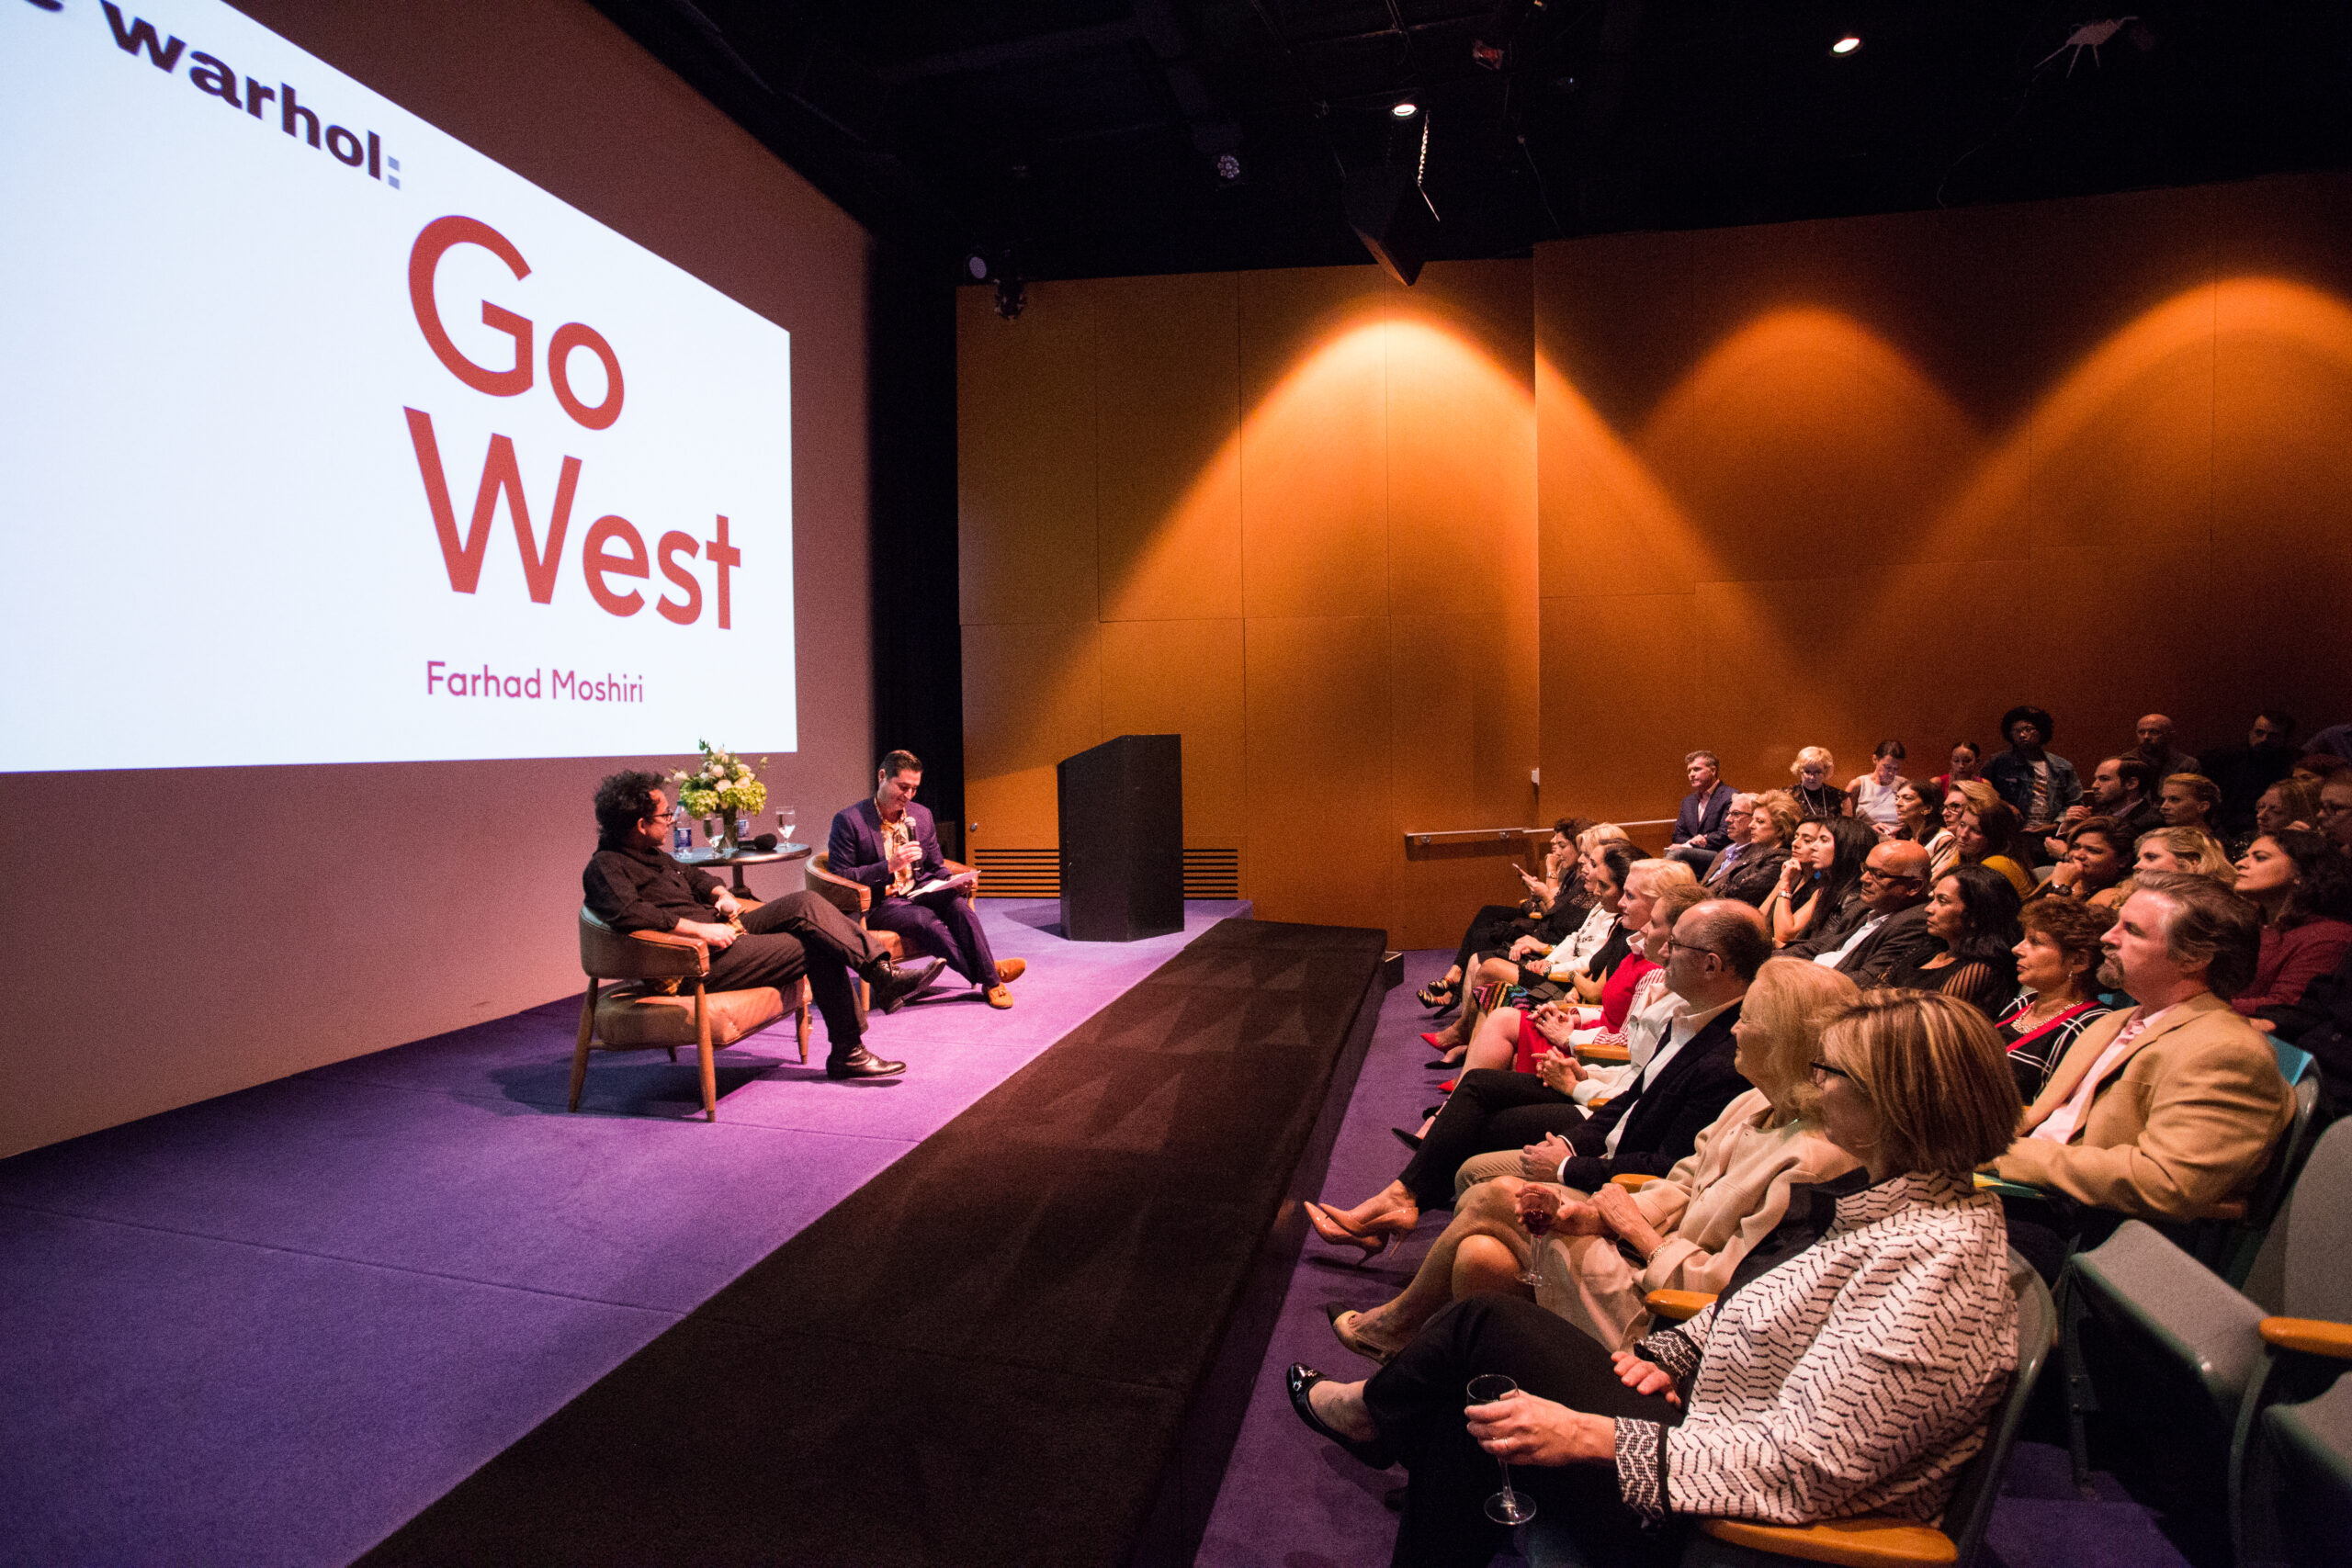 The camera is positioned at the far left of the stage panning out to the audience. The theater is filled with guests looking up towards the discussion occurring on stage. Two men, artist Farhad Moshiri and Chief Curator Jose Diaz, sit in discussion in front of a large projection that reads “Go West” in bold red font.